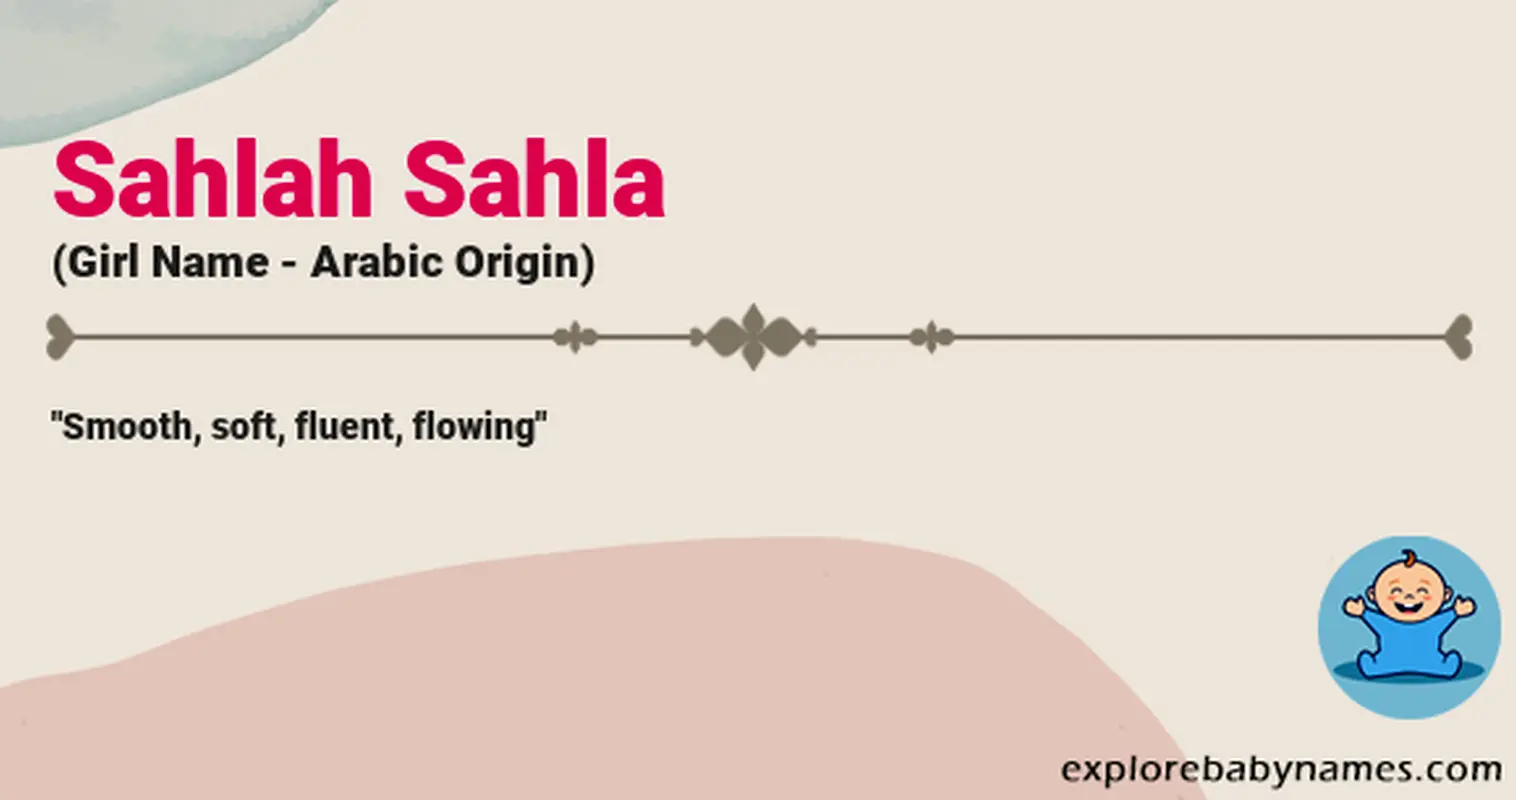 Meaning of Sahlah Sahla